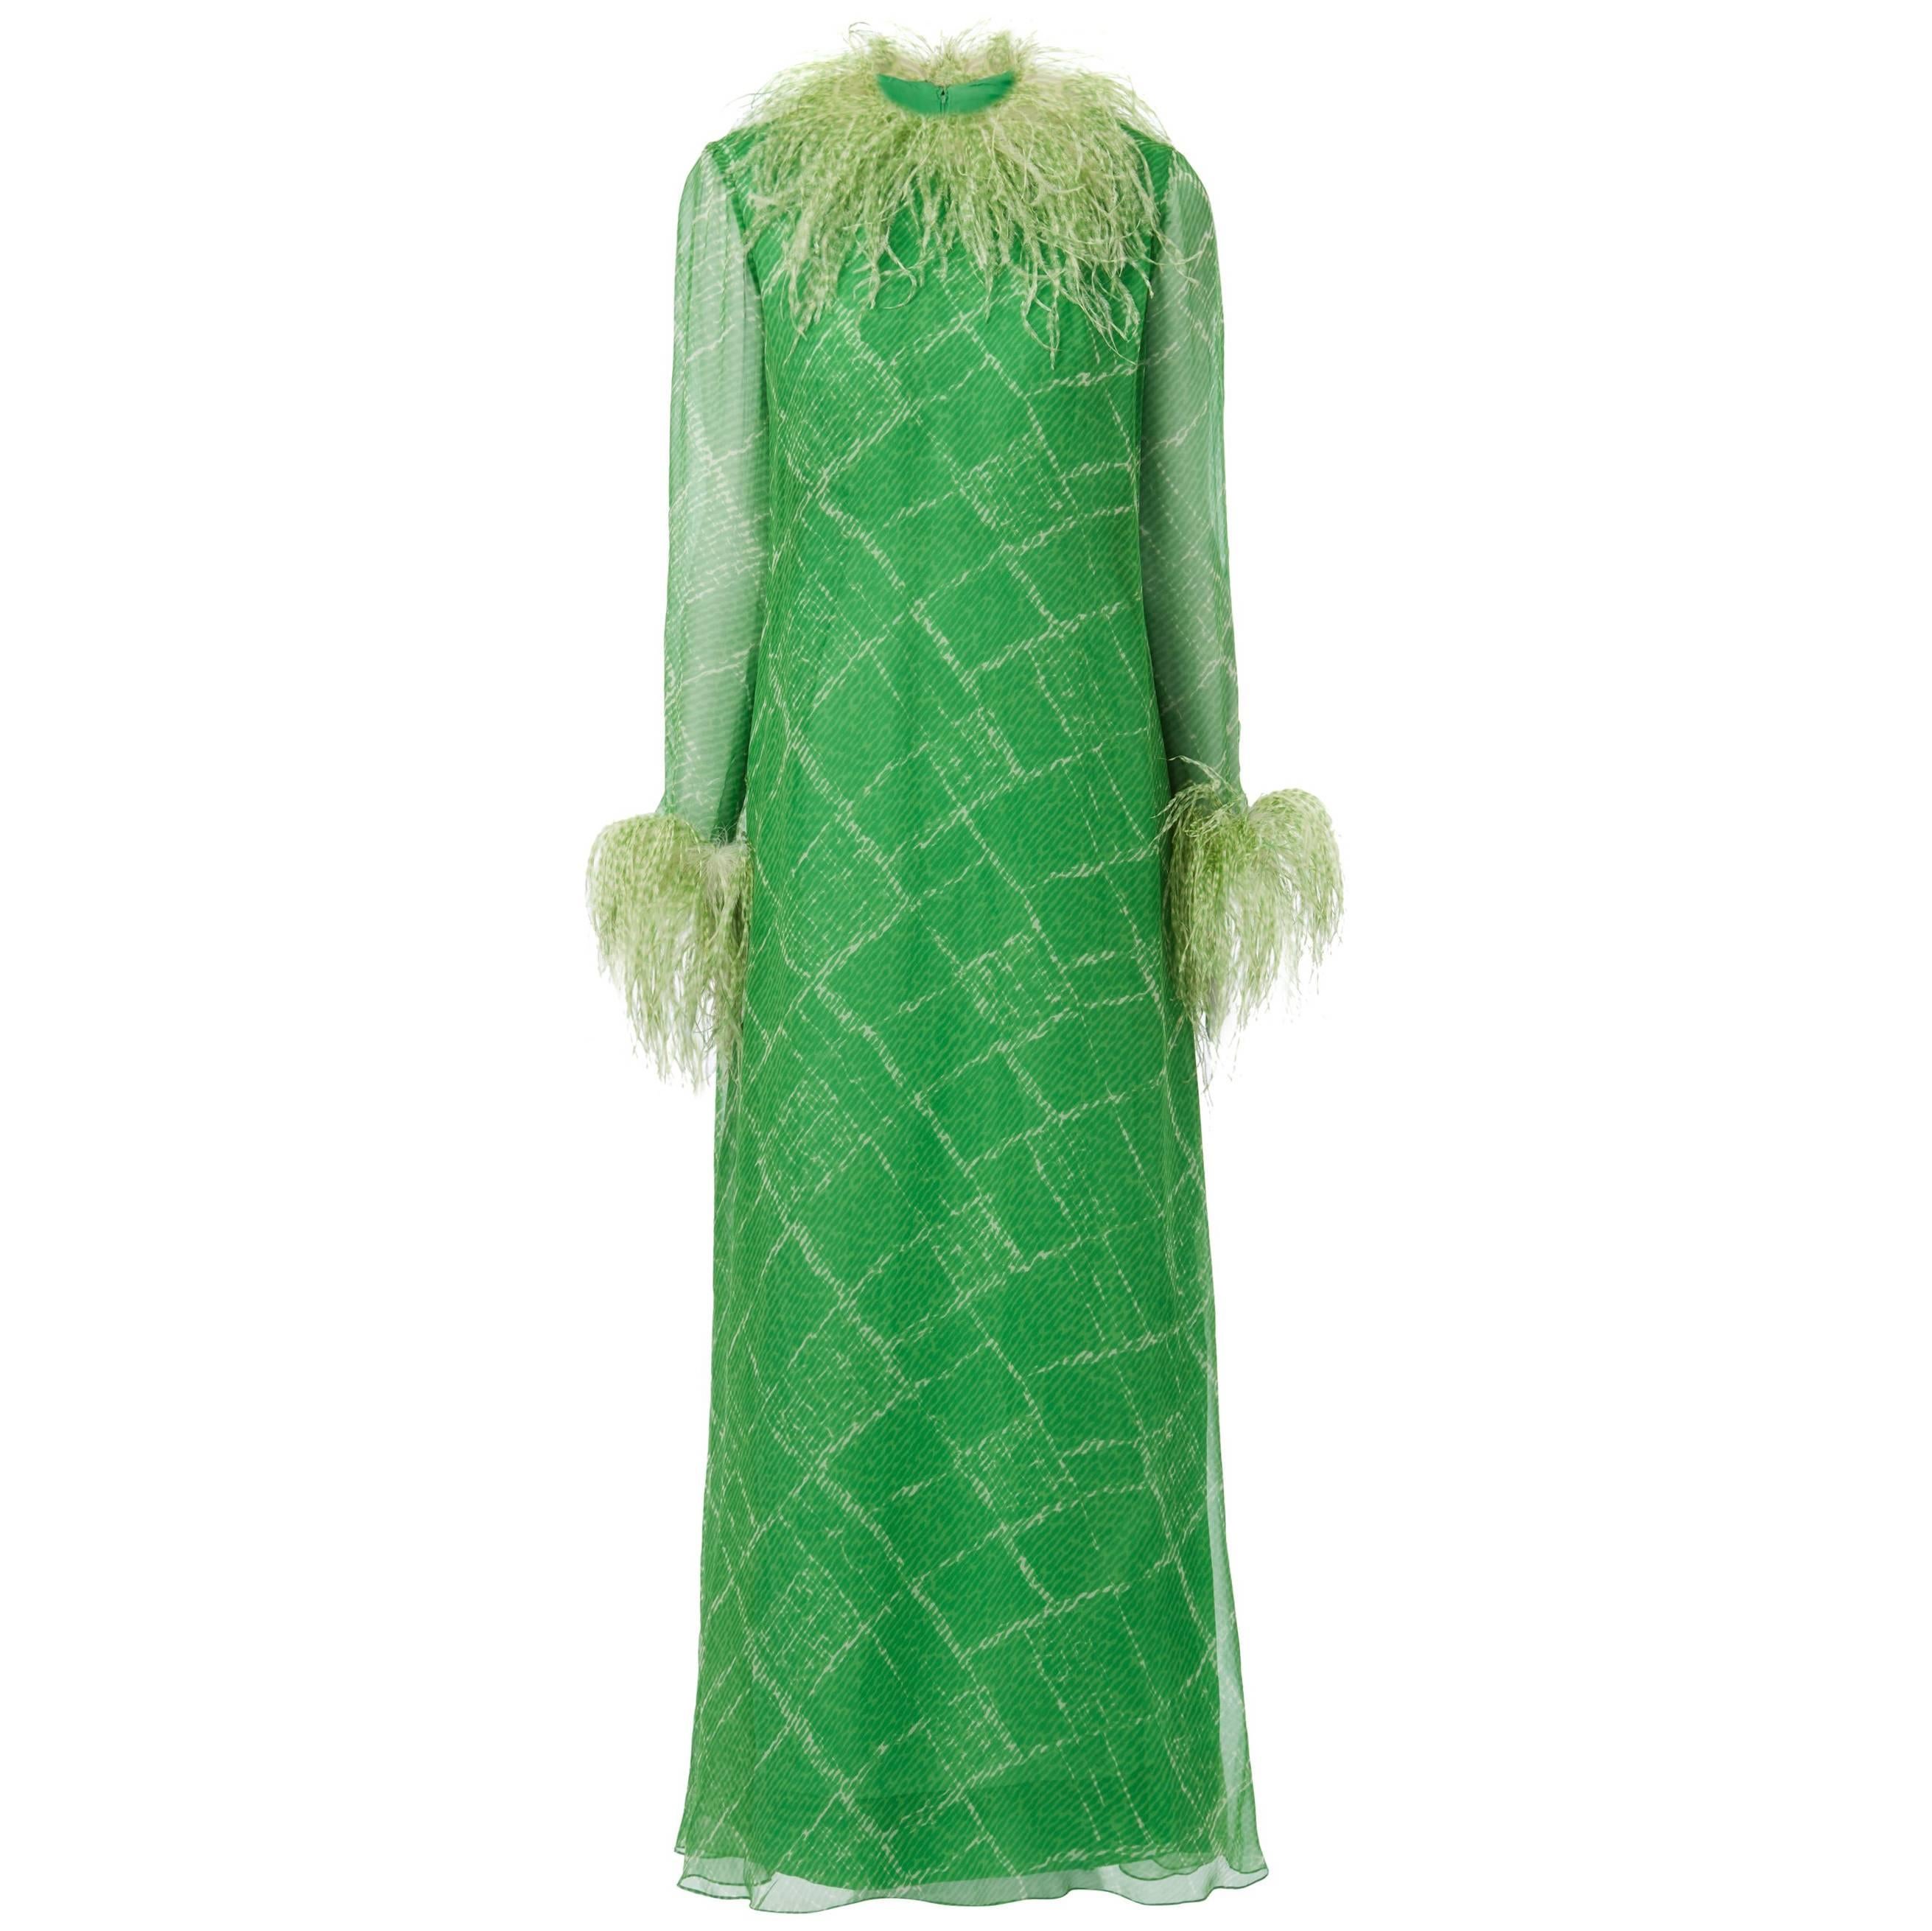 Nan Duskin unlabelled green printed chiffon maxi dress with ostrich feather embe